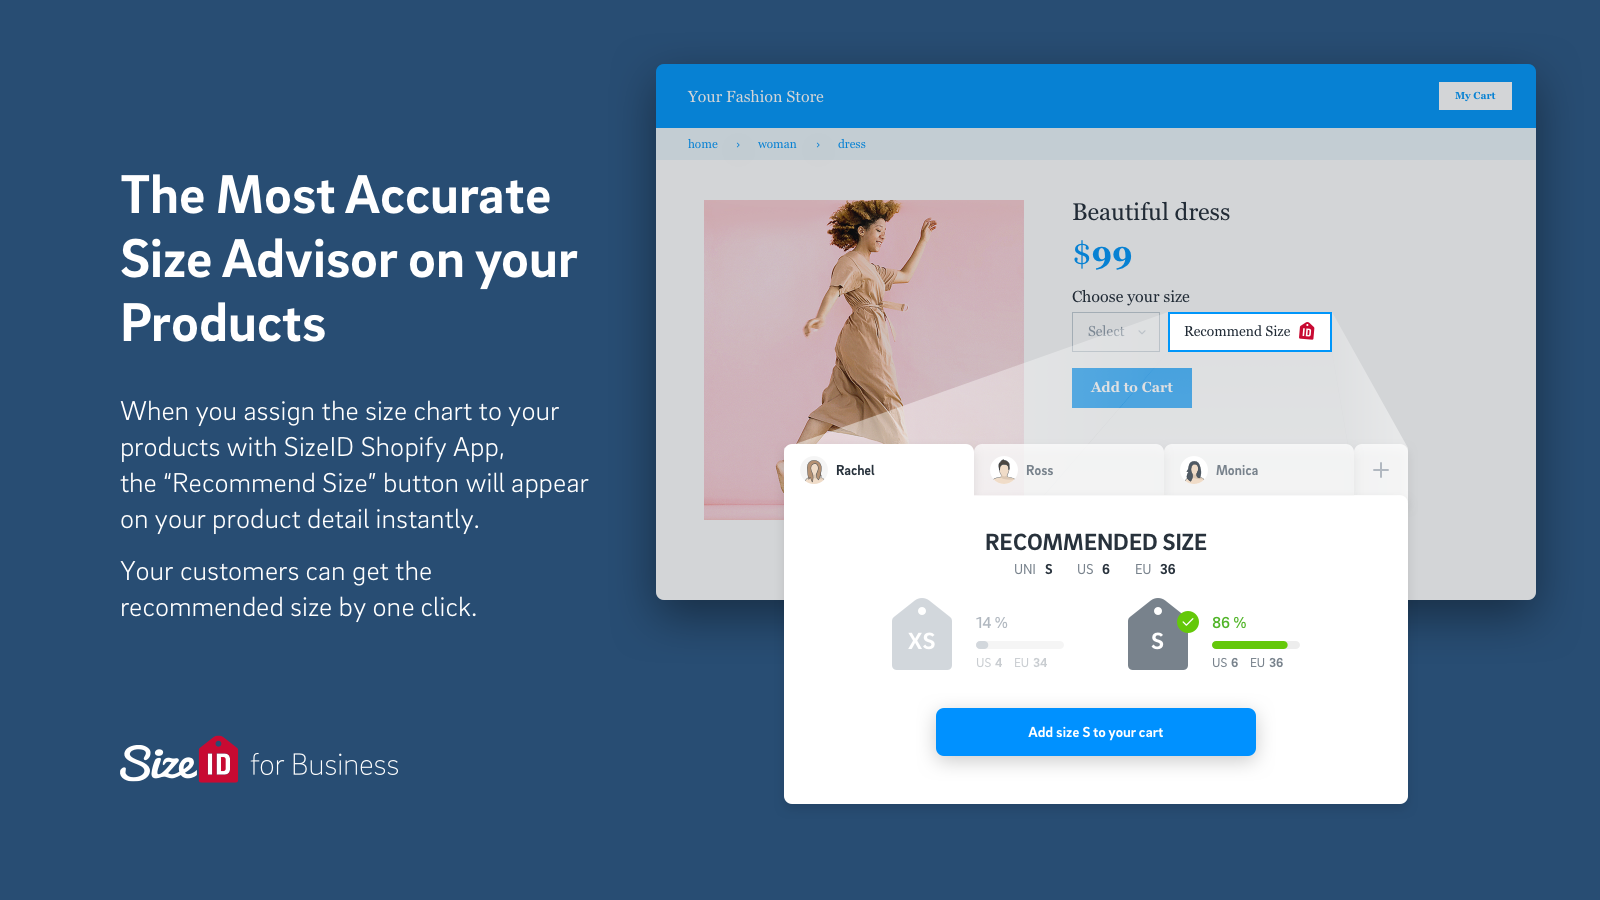 The Most Accurate Size Advisor on your Products